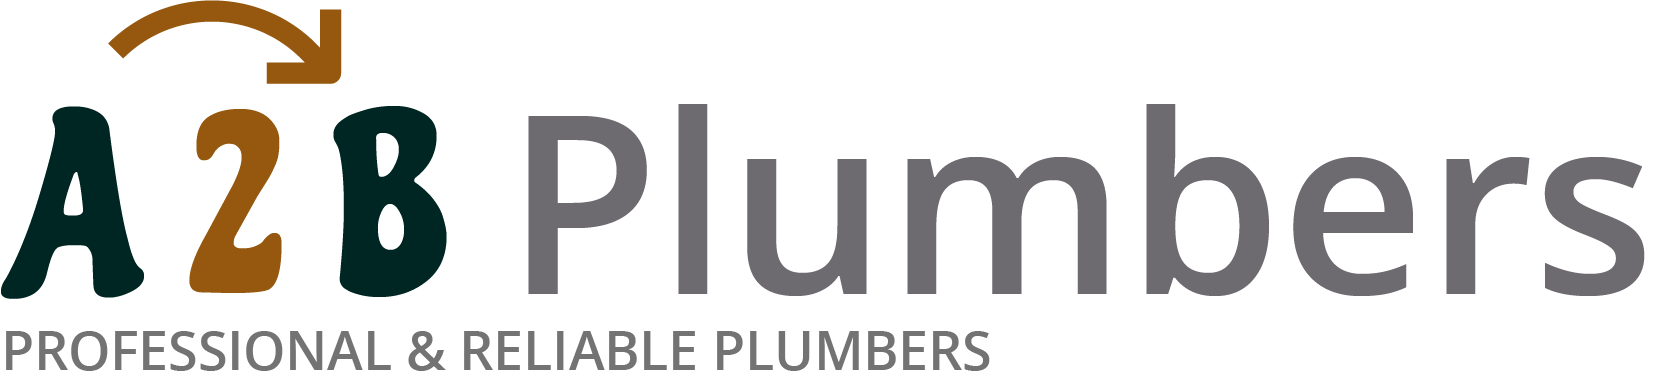 If you need a boiler installed, a radiator repaired or a leaking tap fixed, call us now - we provide services for properties in Tufnell Park and the local area.